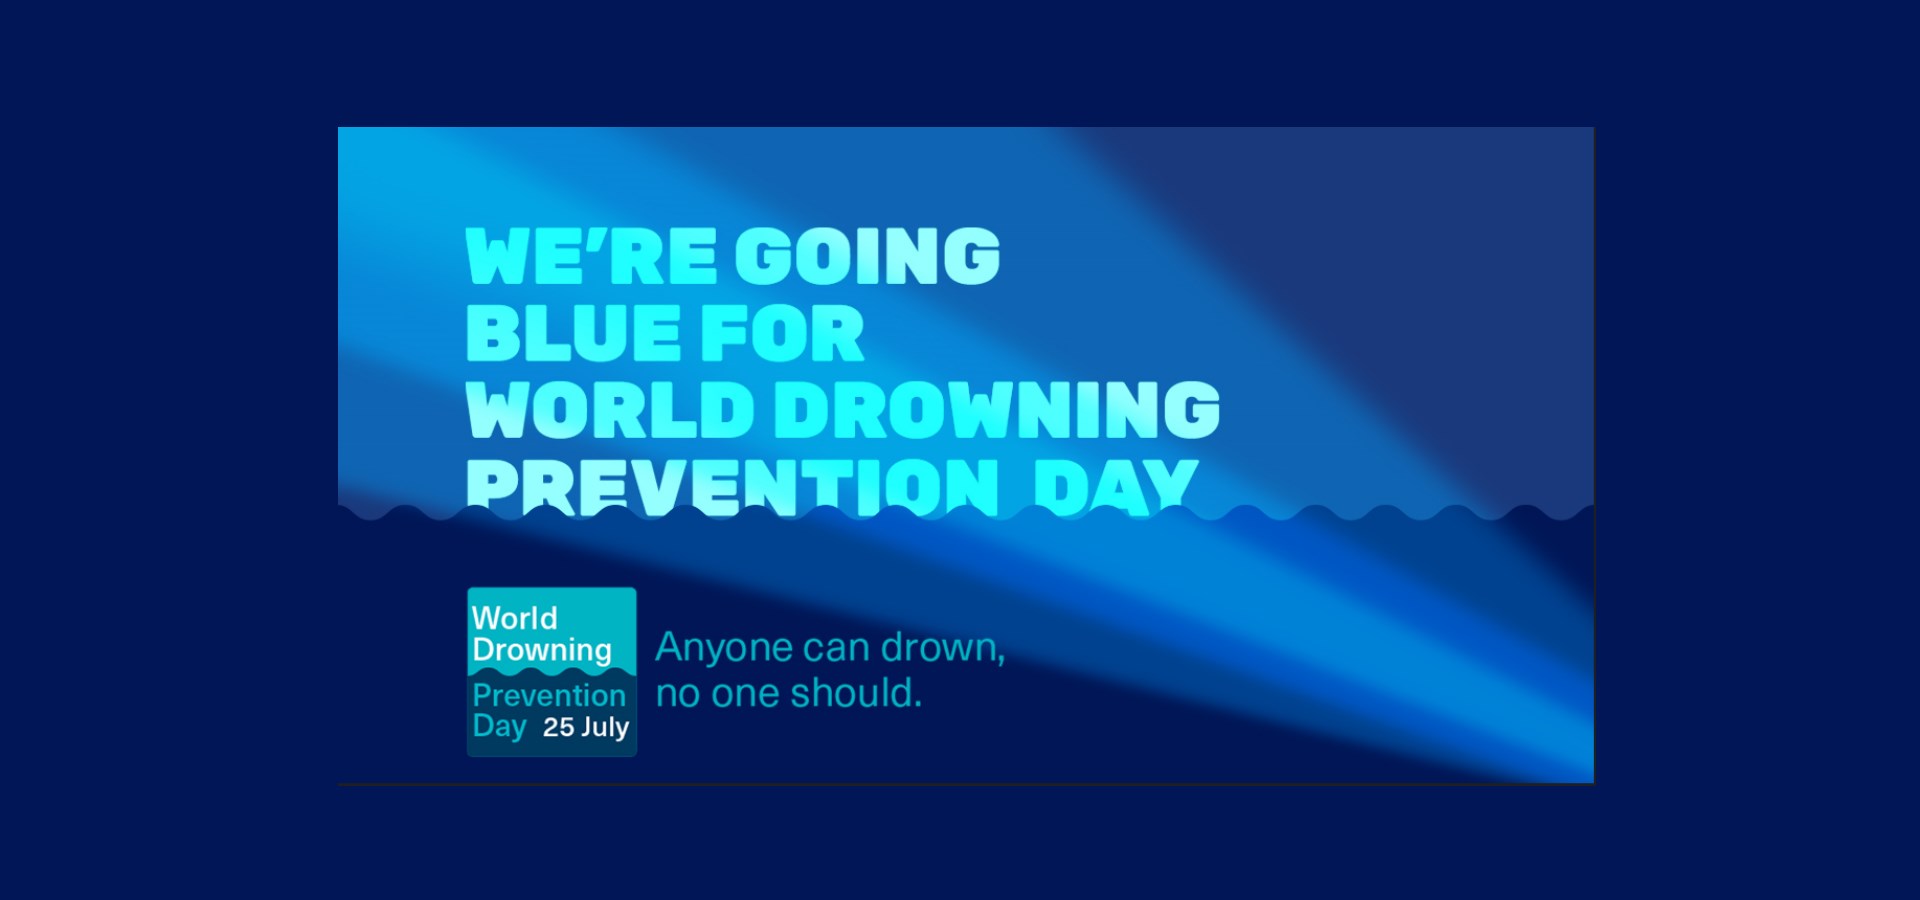 We're going blue for world drowning prevention day 25th July